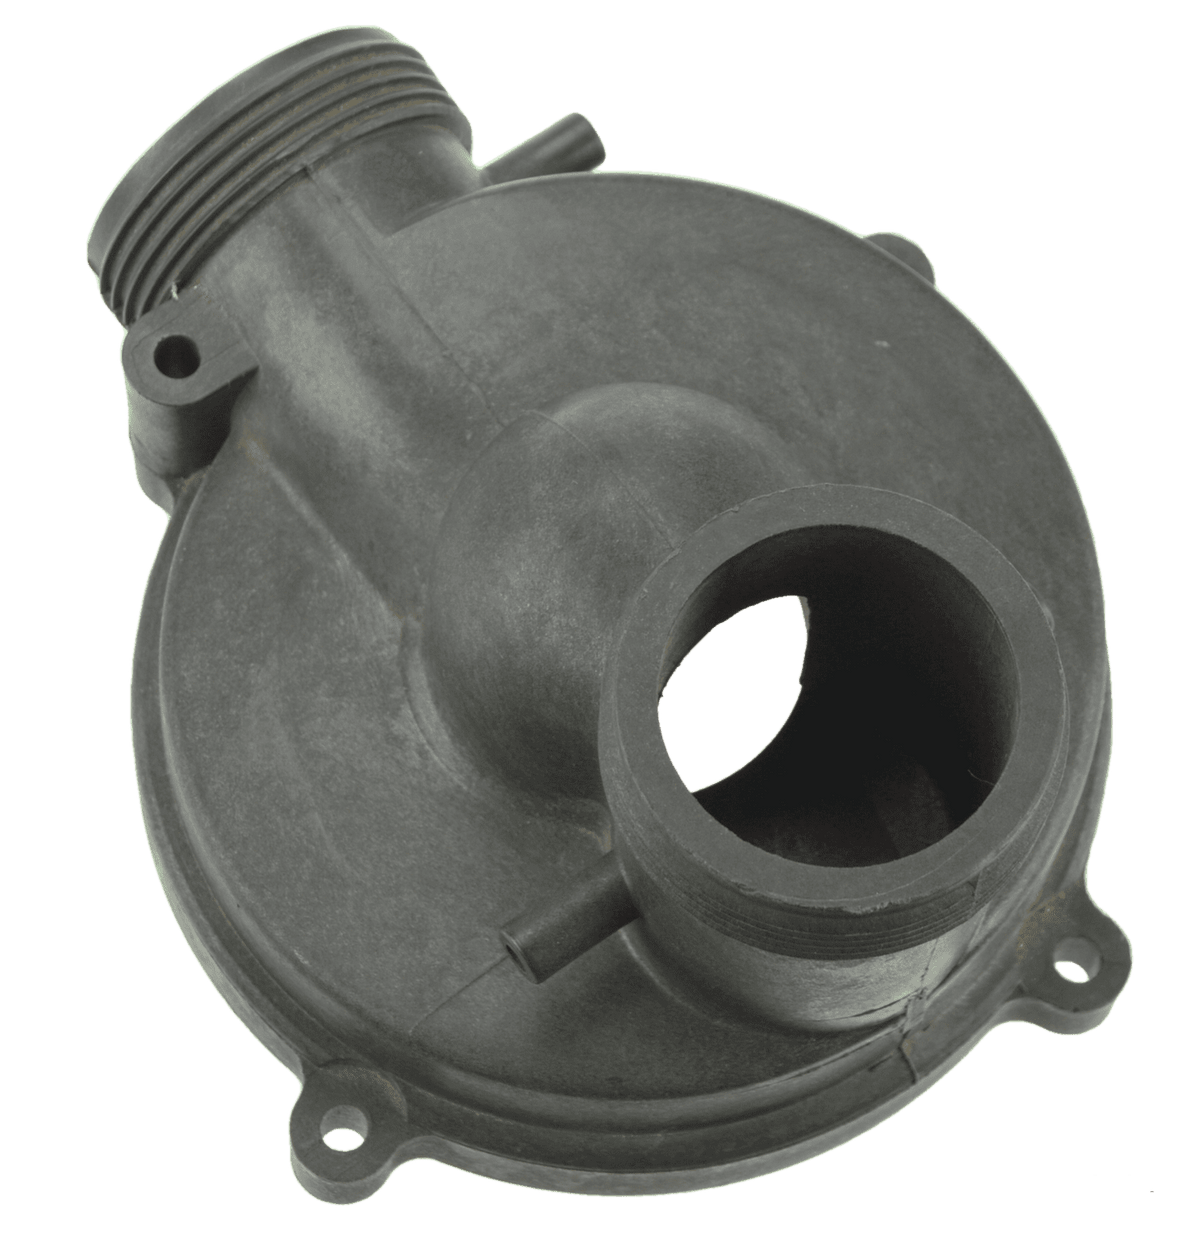 Balboa Vico Ultima Circulation Pump Front Housing Body - Self Draining: High-quality replacement part